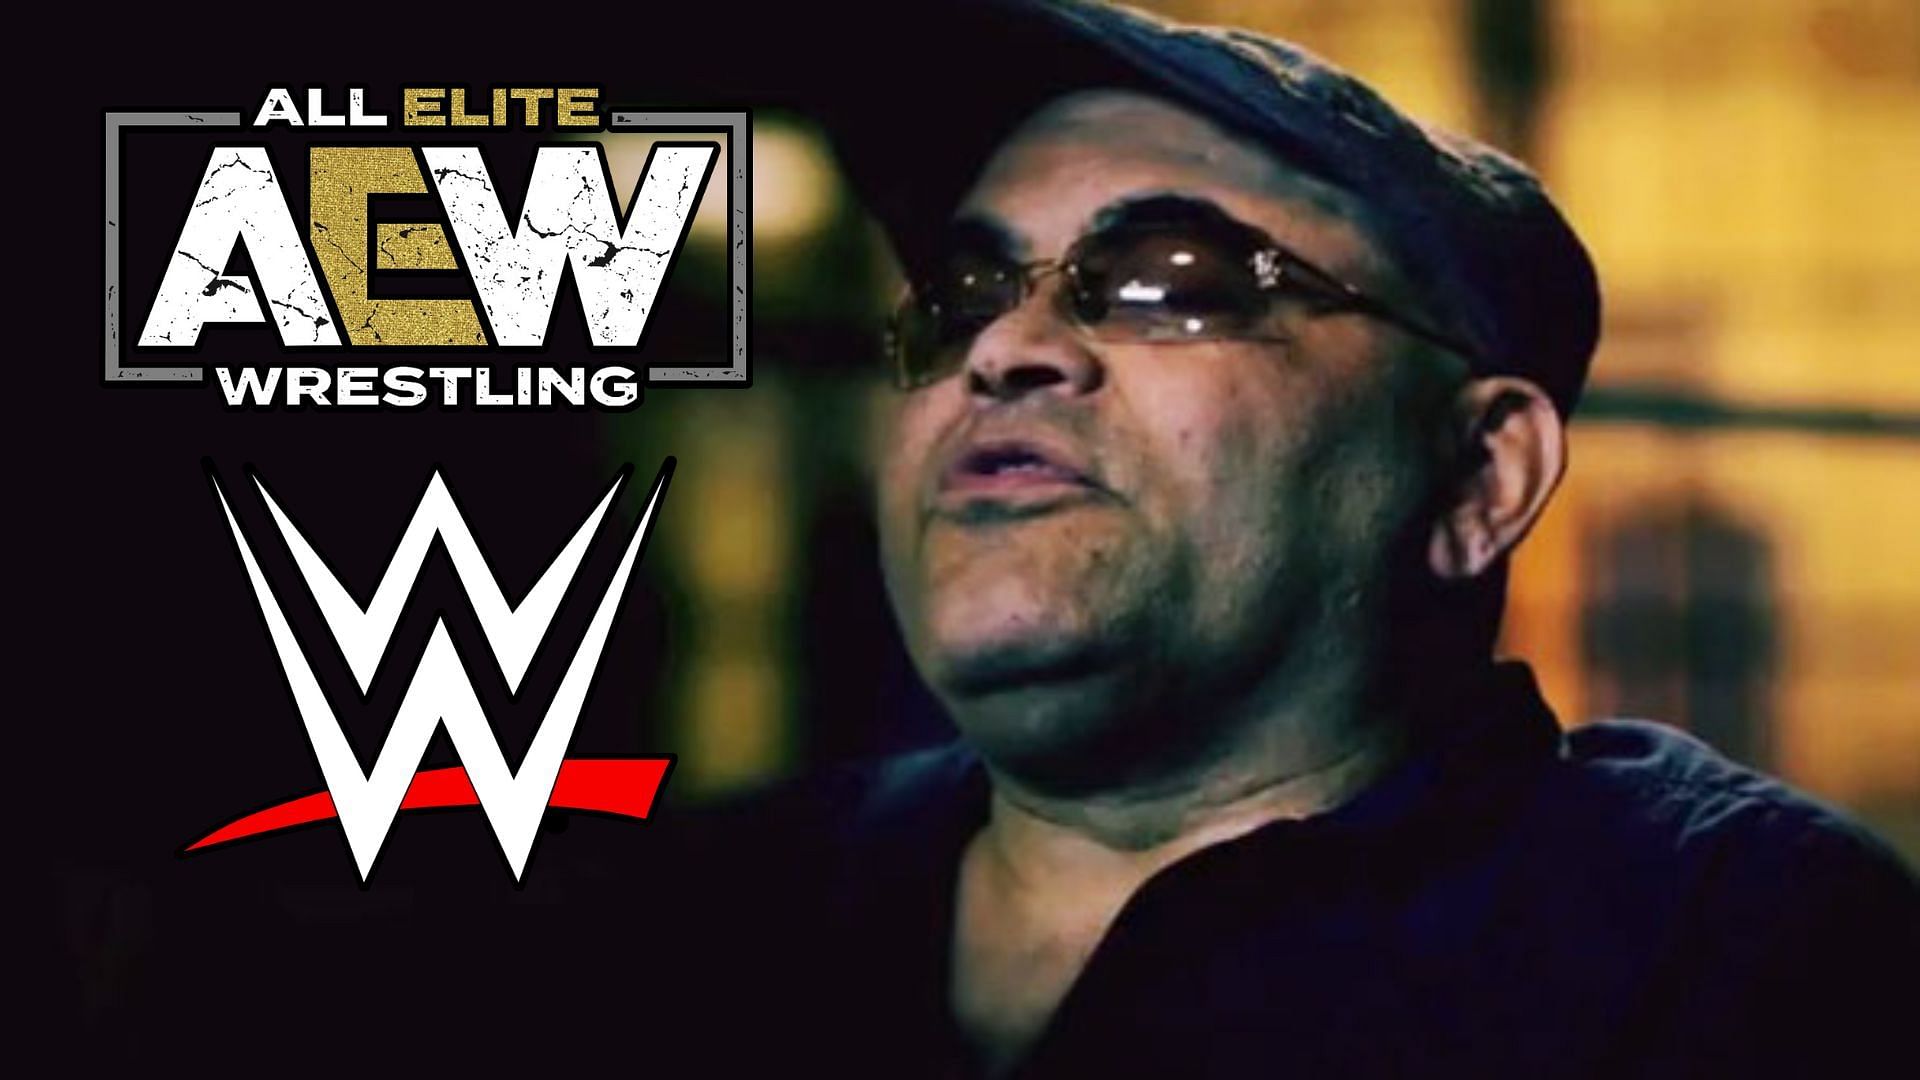 Despite being retired in the ring, Konnan has not stepped away from wrestling.